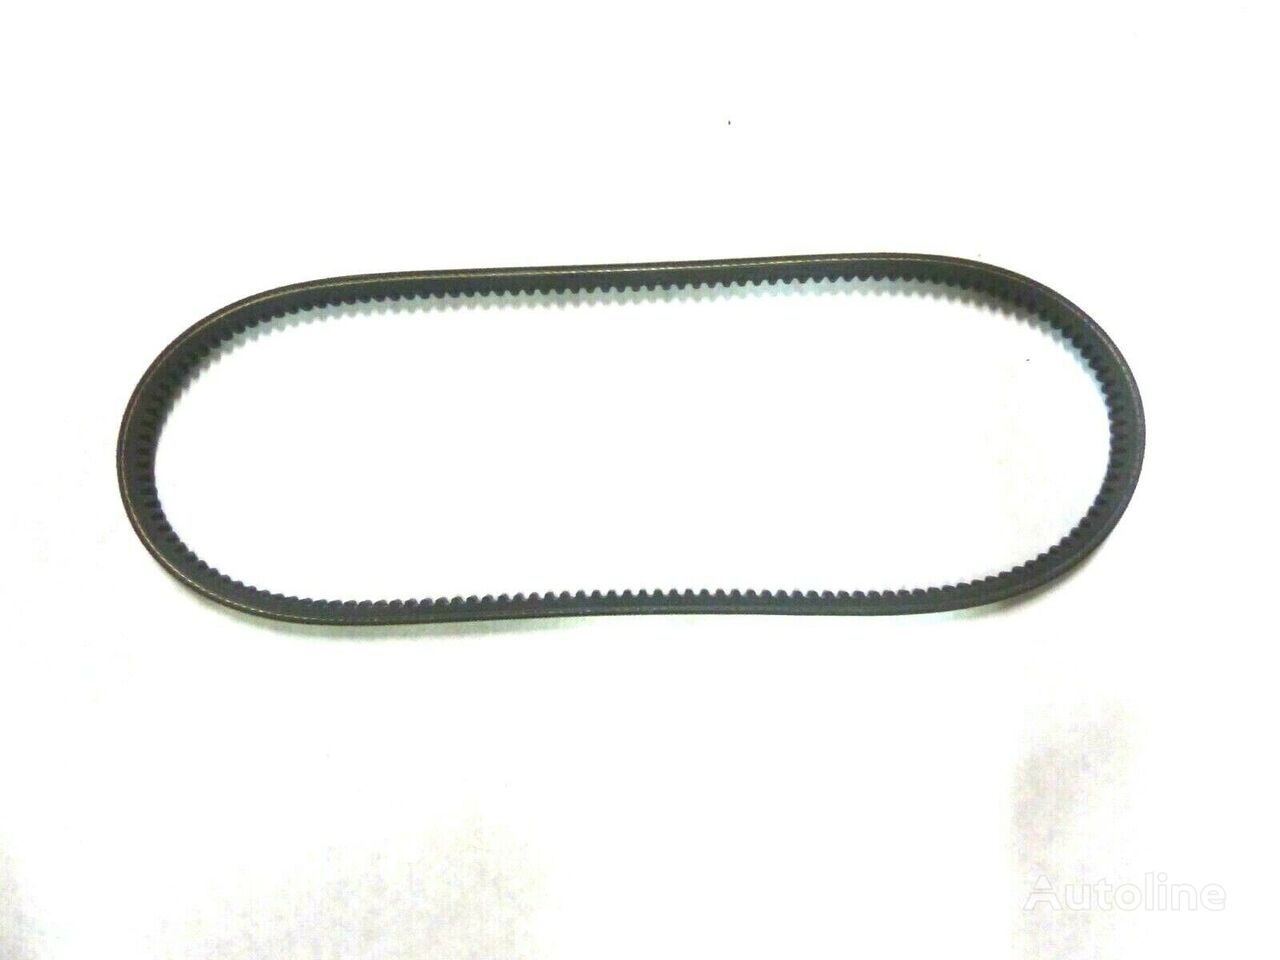 HUTCHINSON POLY V KEIL-RIPPEN-RIEMEN 504129827 timing belt for truck tractor